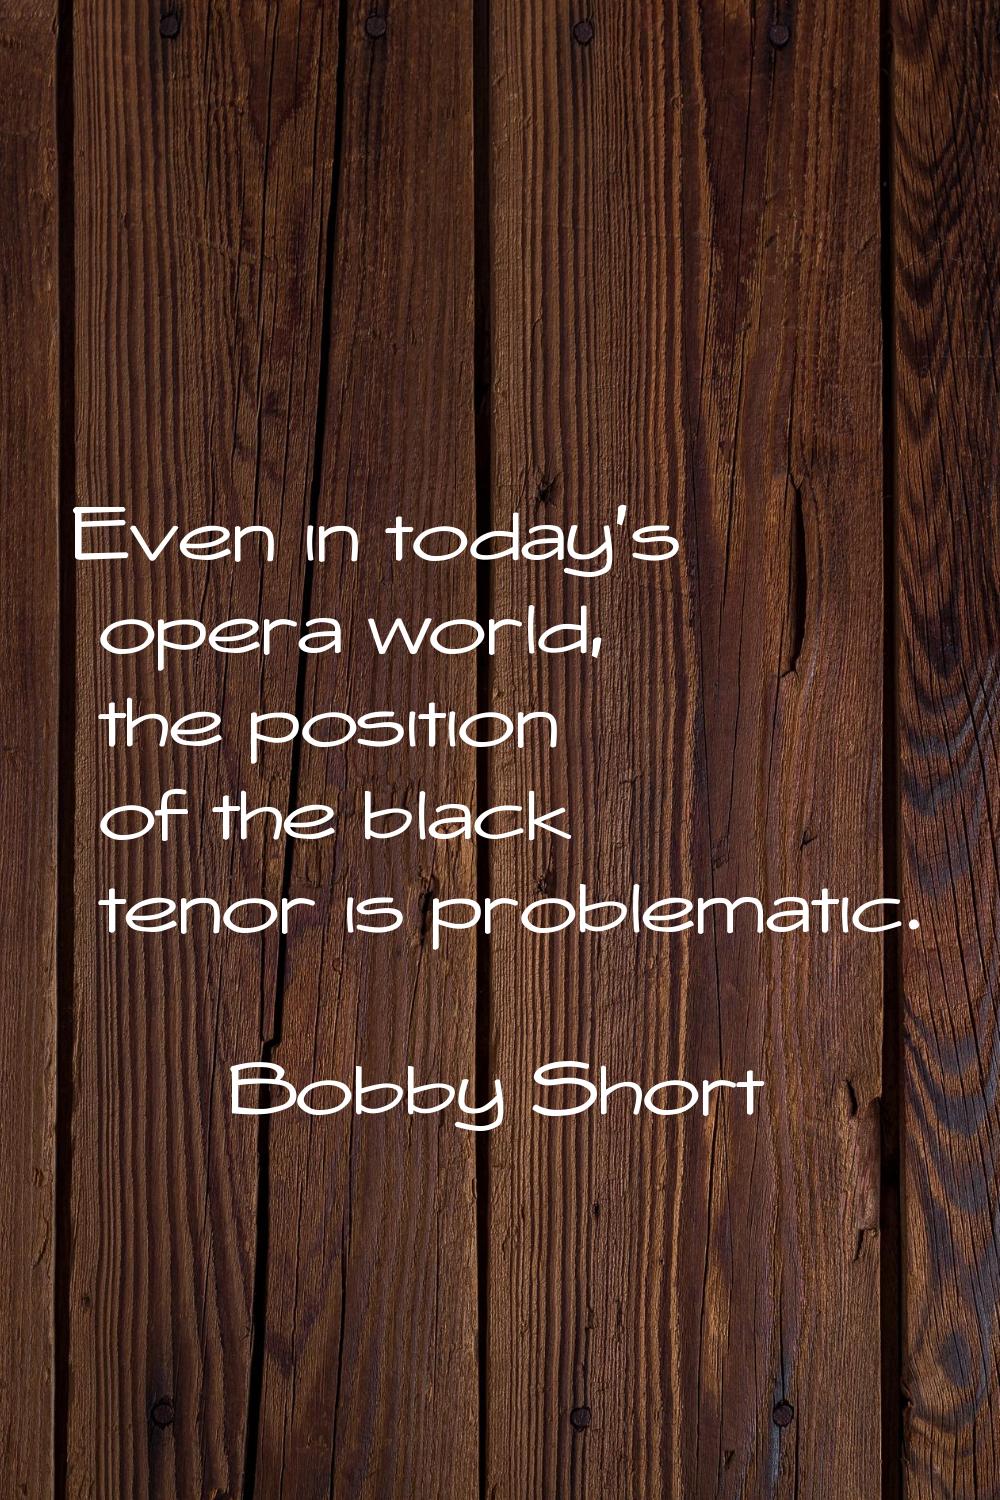 Even in today's opera world, the position of the black tenor is problematic.